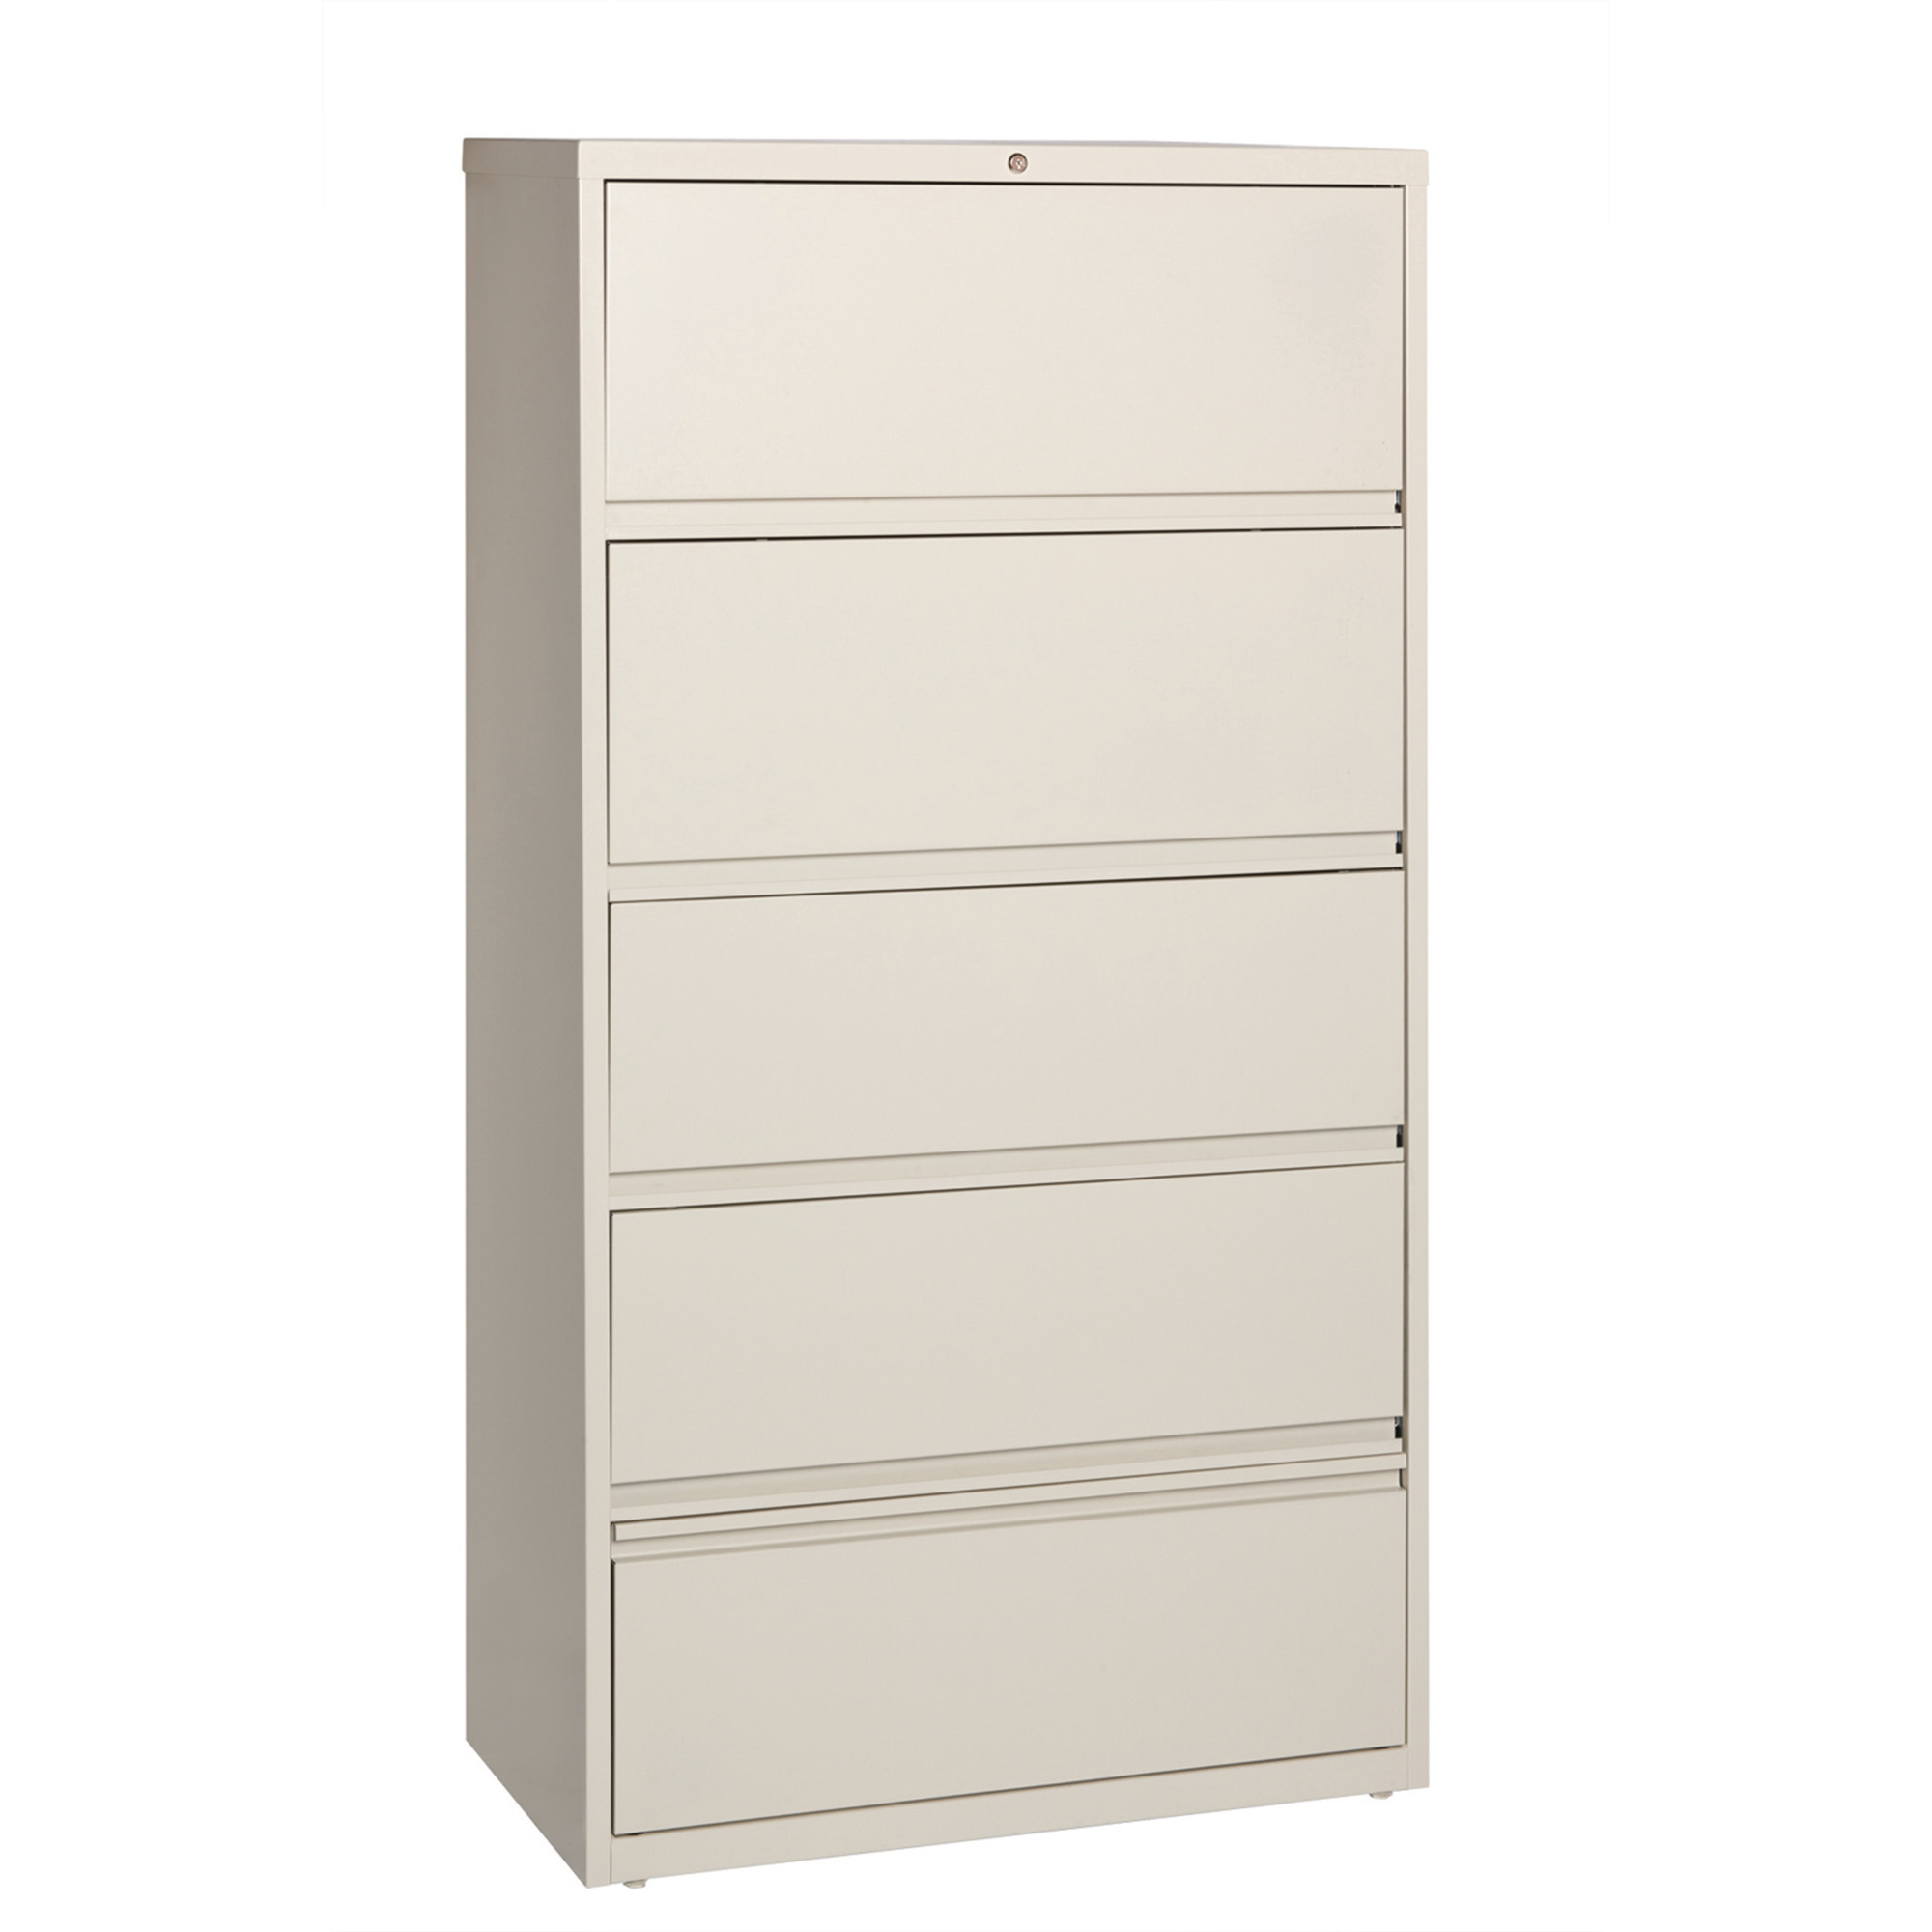 Hirsh Industries, 5 Drawer Lateral File Cabinet, Width 36 in, Depth 18.625 in, Height 68.625 in, Model 17901